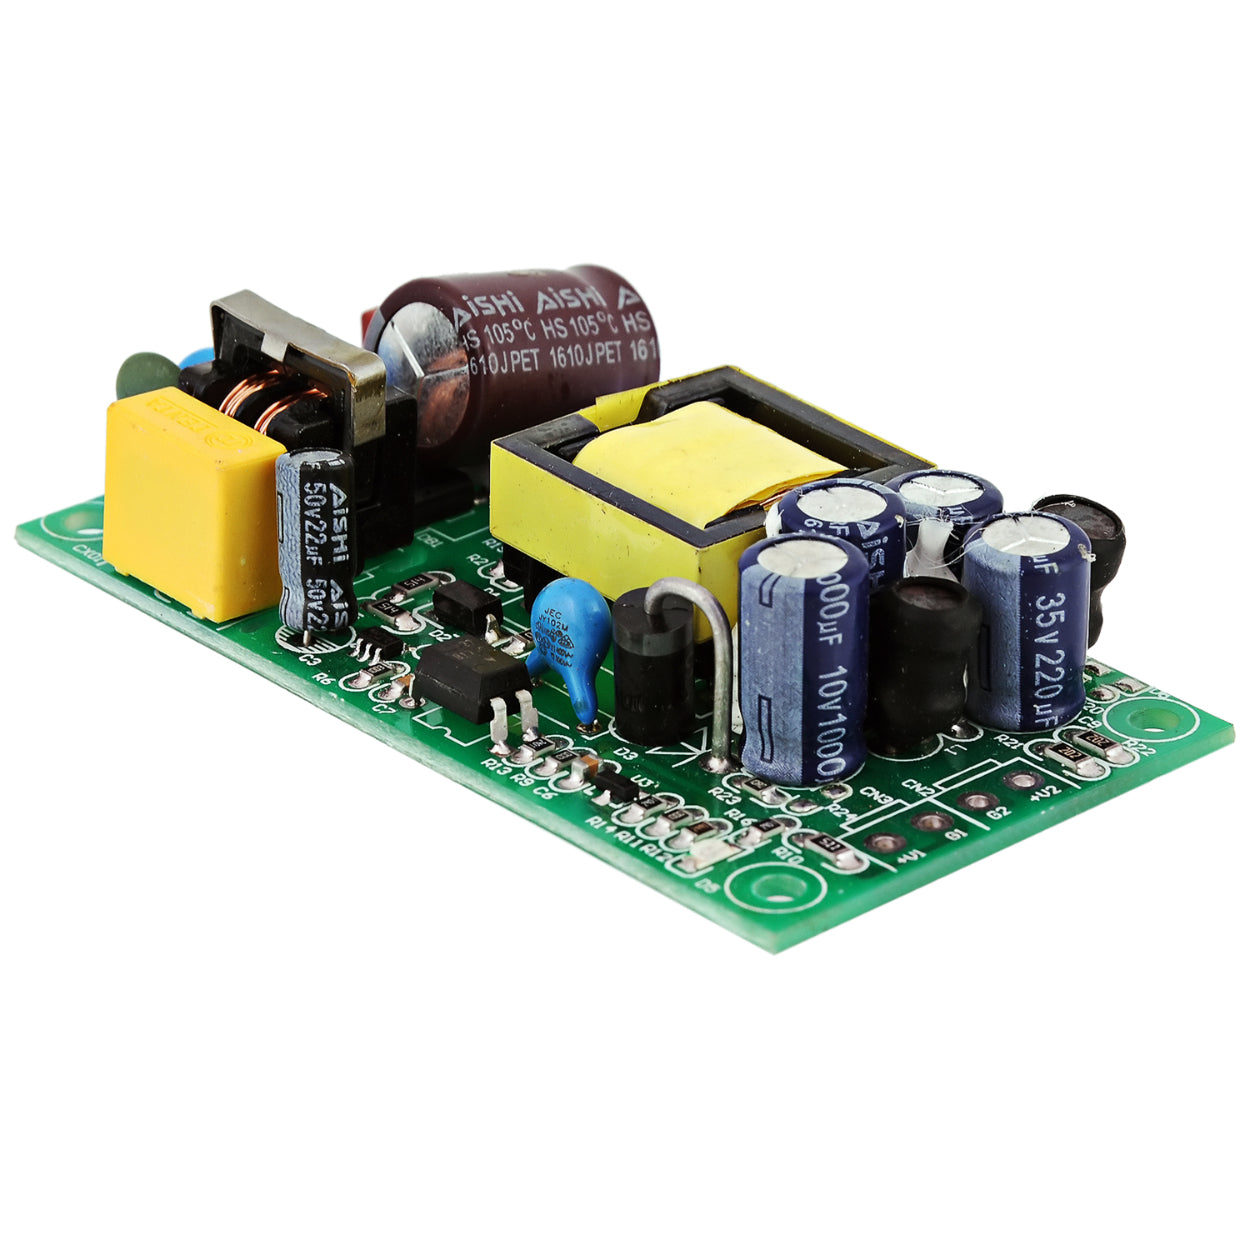 DC 24V 600mA Or DC 5V 500mA Dual Output Switching Power Supply Module Precision Step-down Module